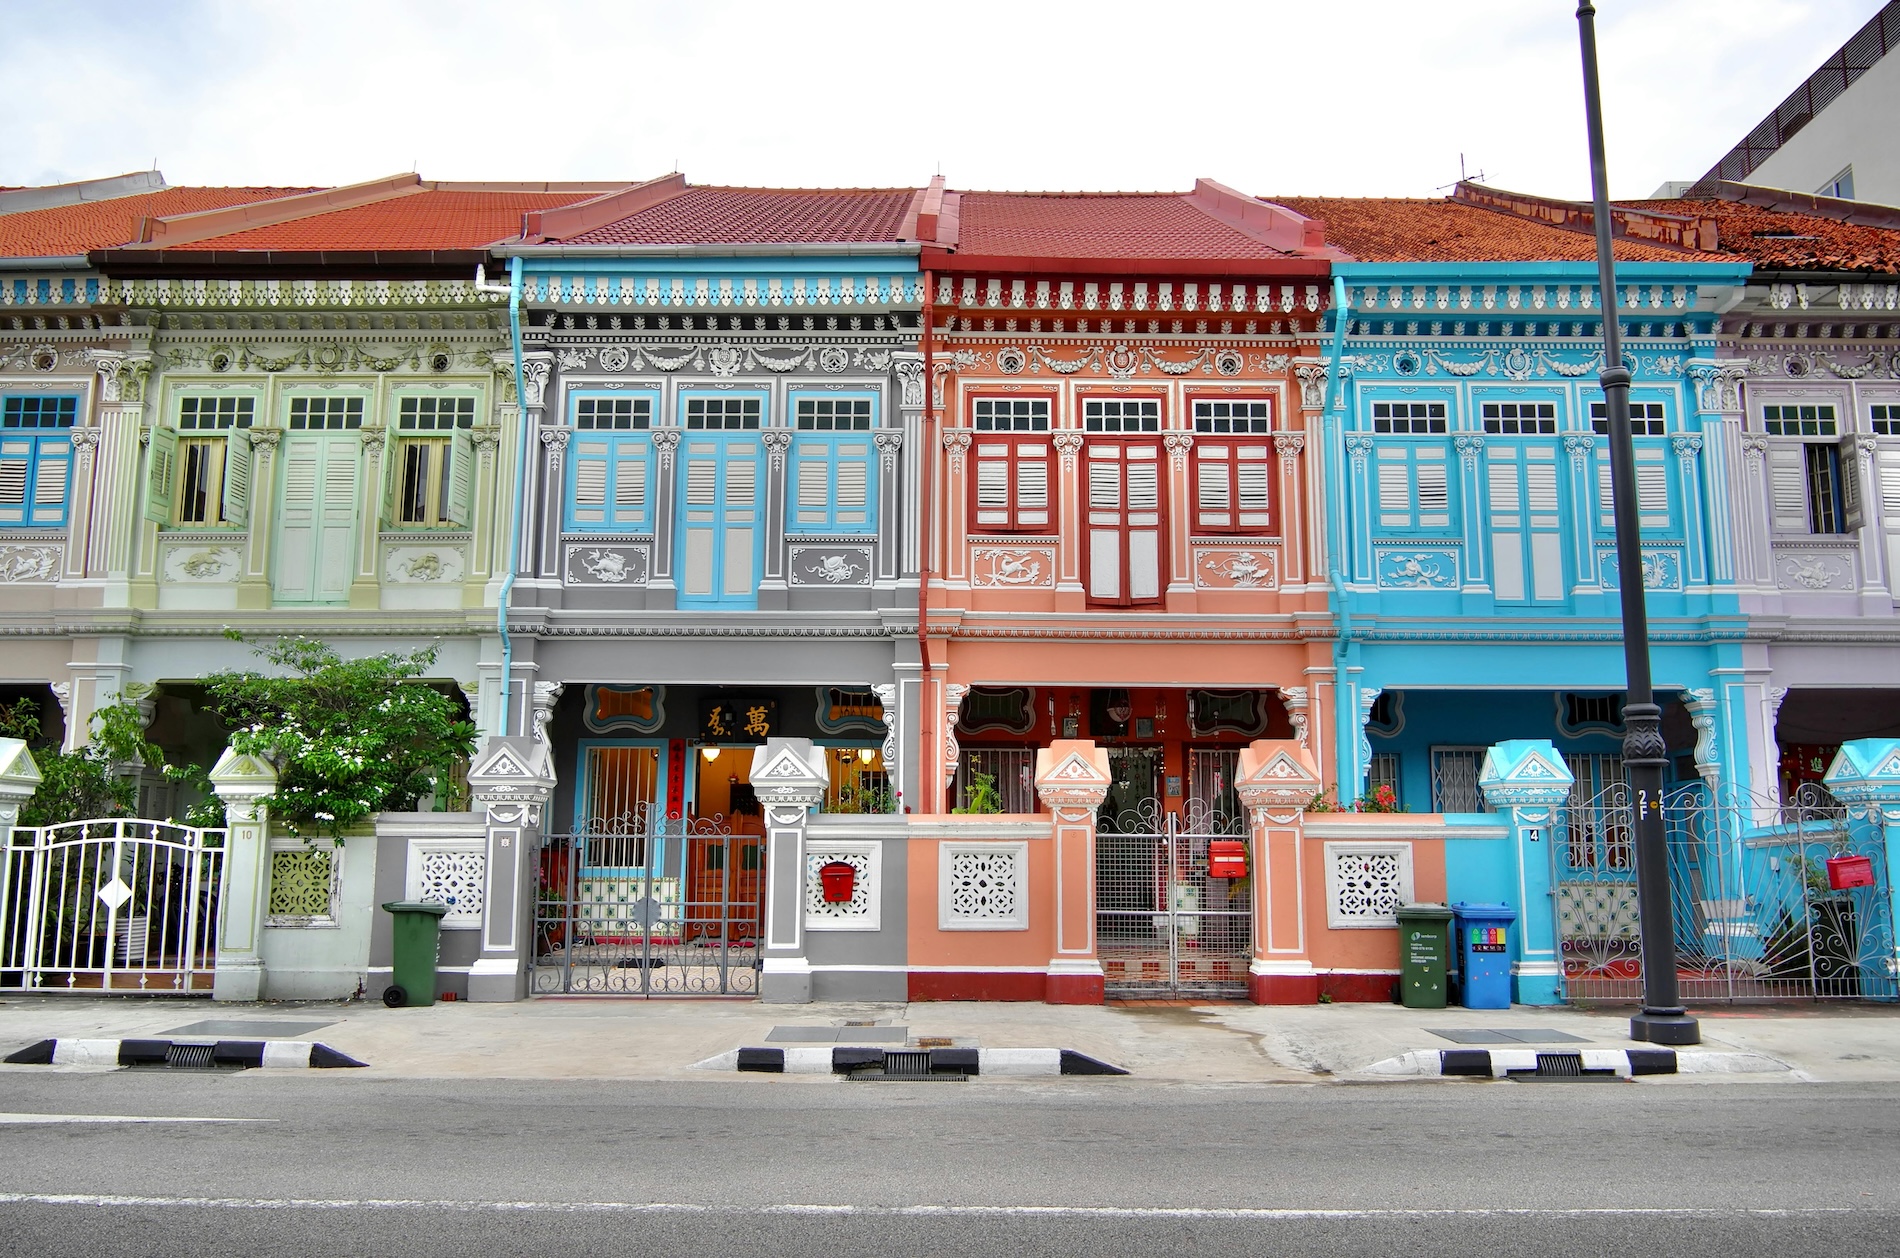 Singapore Houses with Different Colors in Asia new bucket list destination flights direct for Vancouver Canadians with Air Canada airline